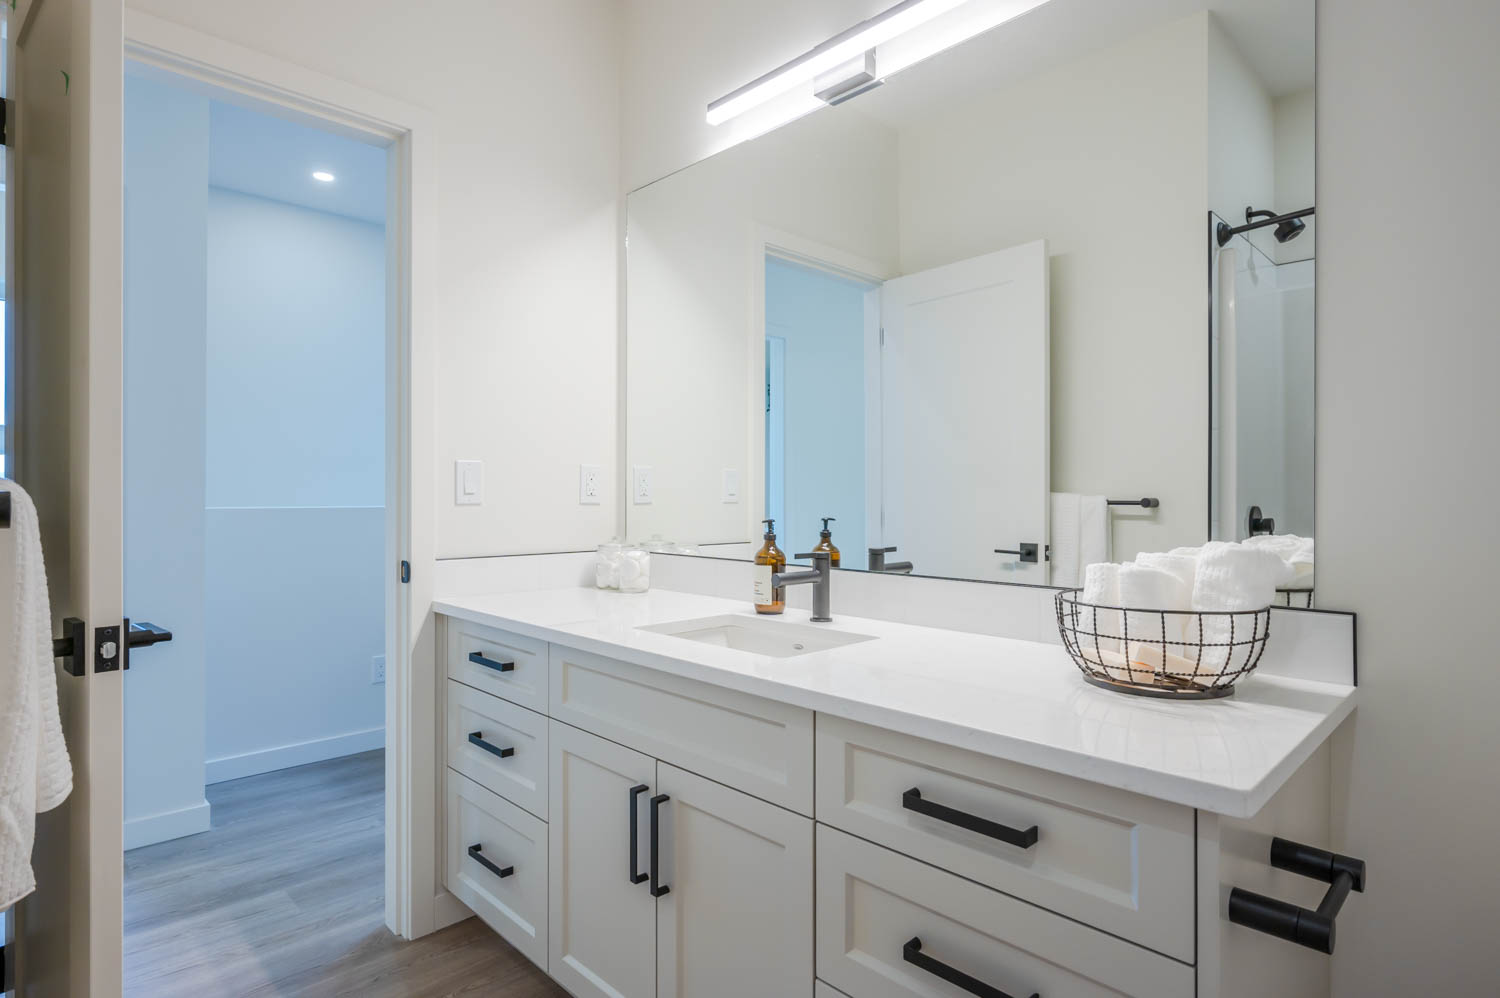 A modern bathroom with a sink, mirror, and ZLINE Bliss Bath Faucet in brushed nickel, perfect for any home.